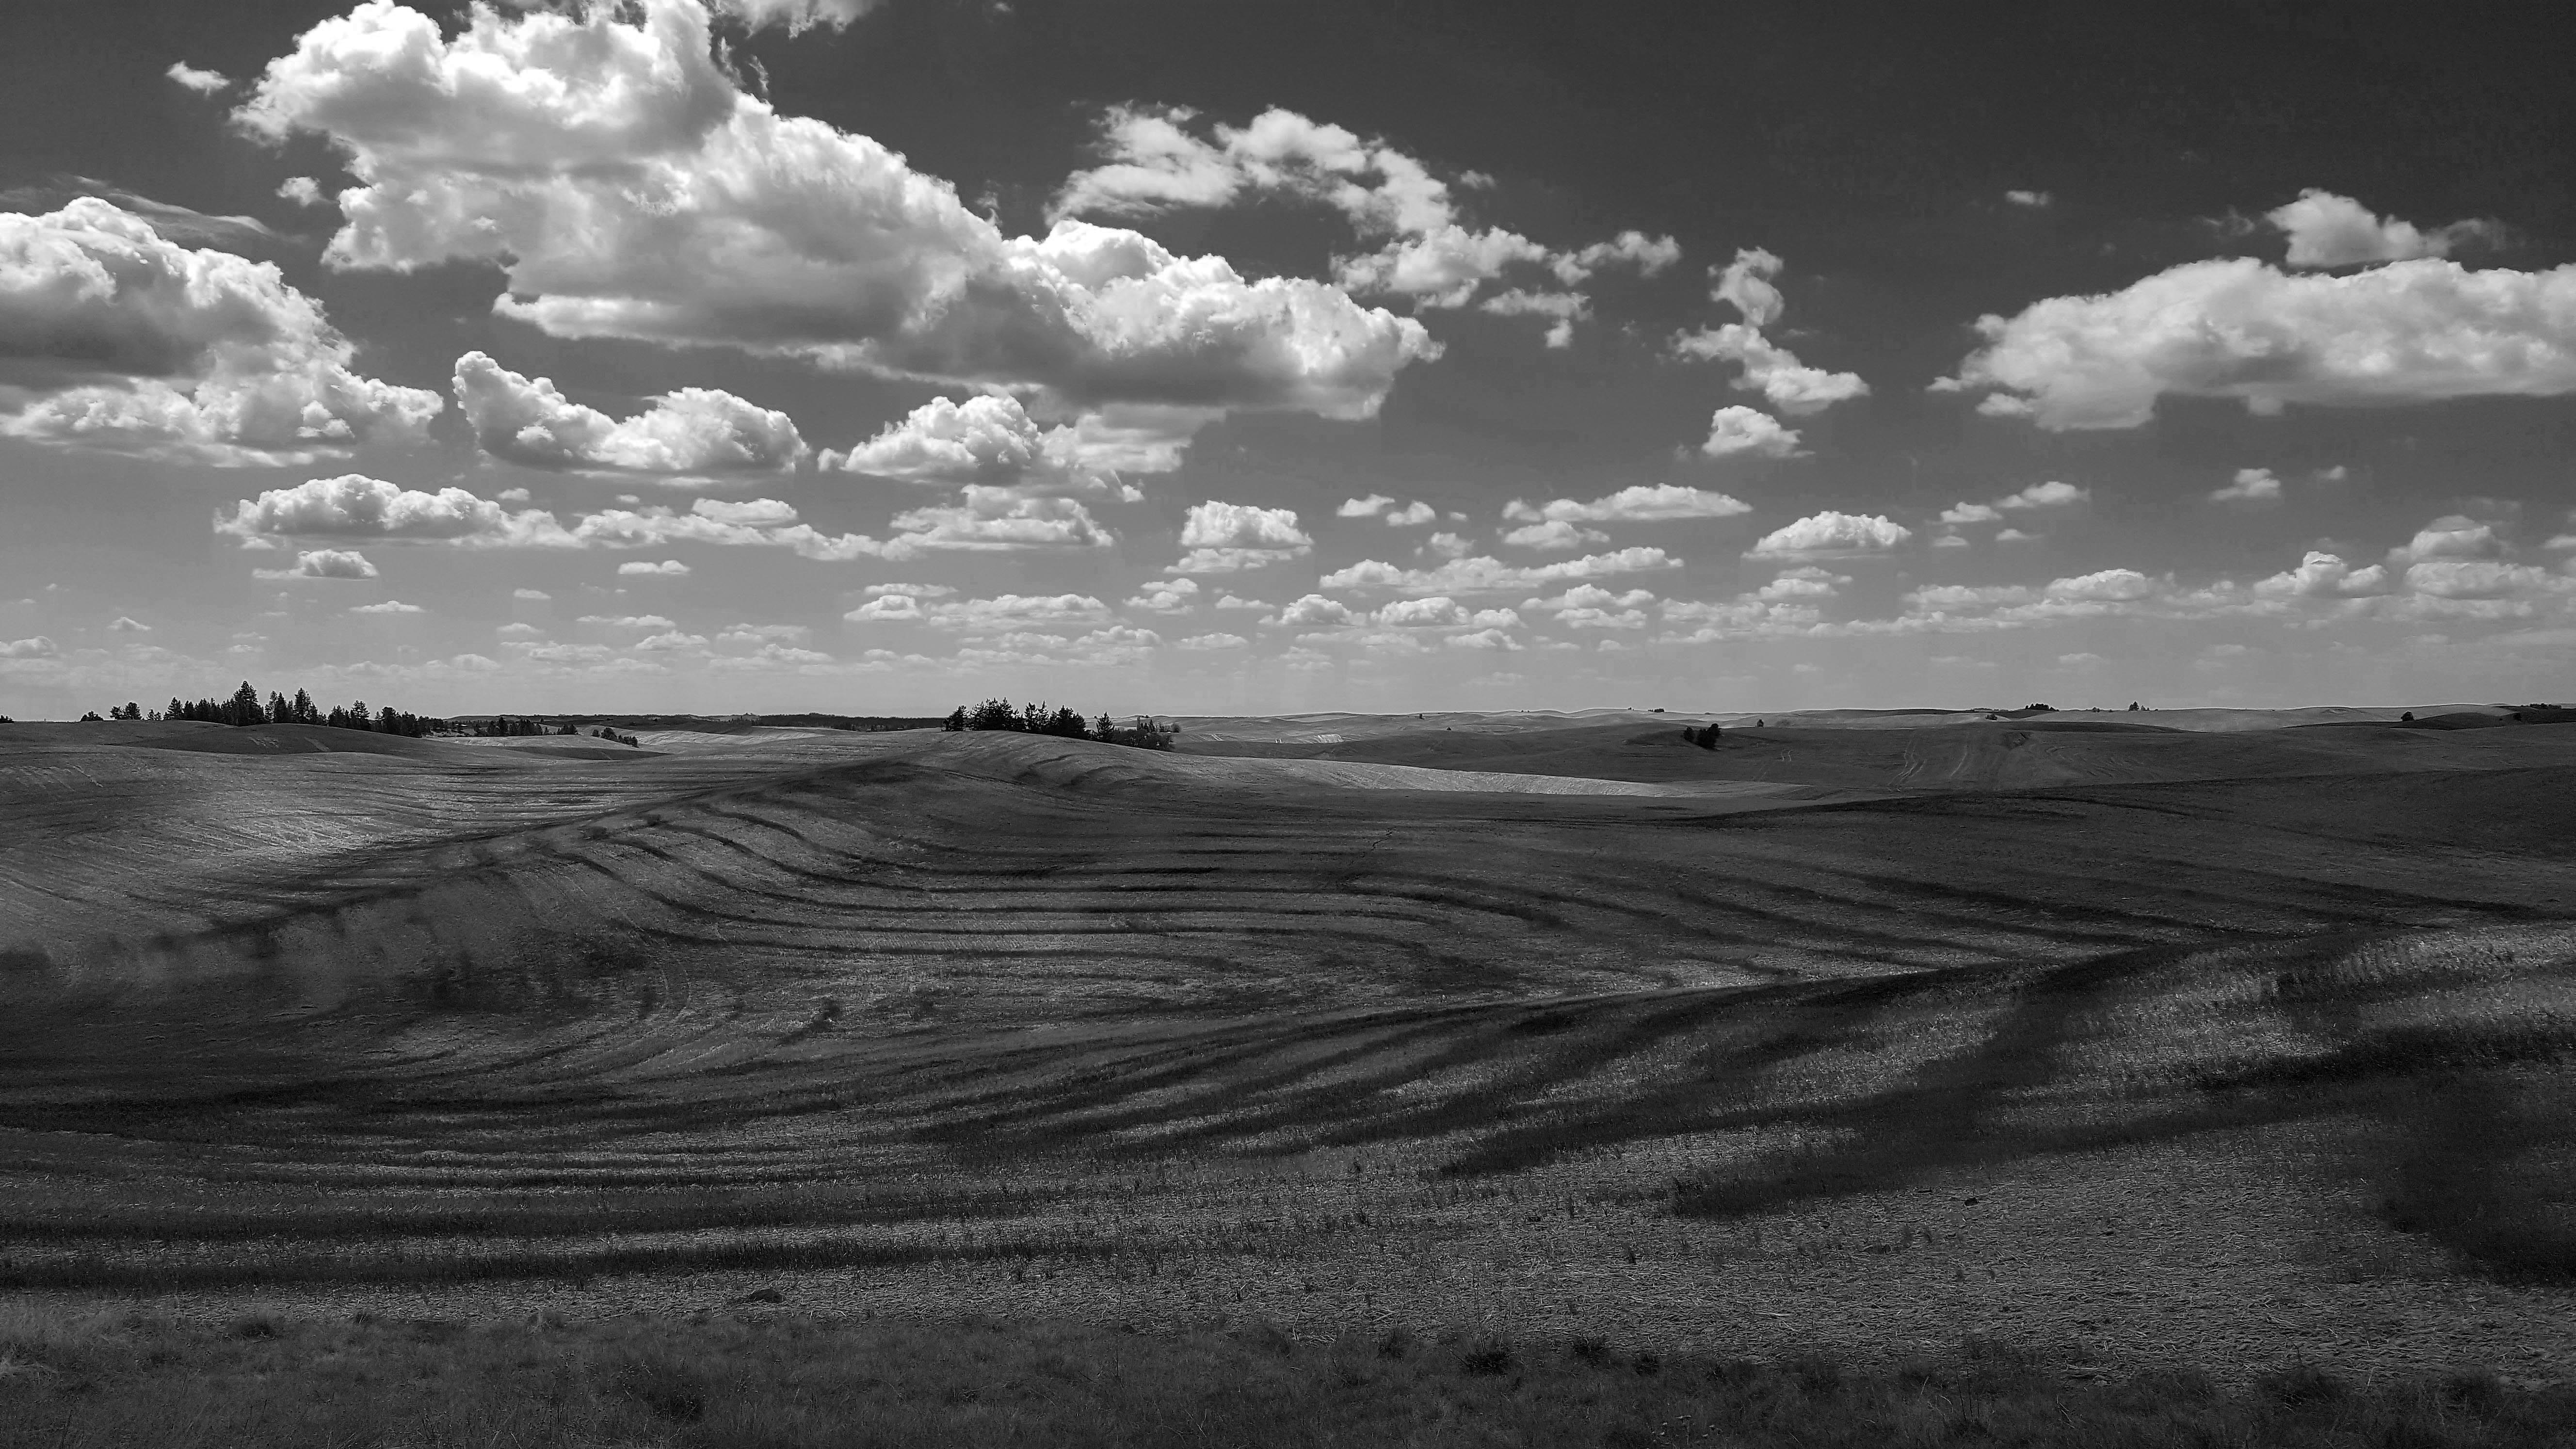 black and white photo of rolling wheat fields with puffy white clouds in the sky above